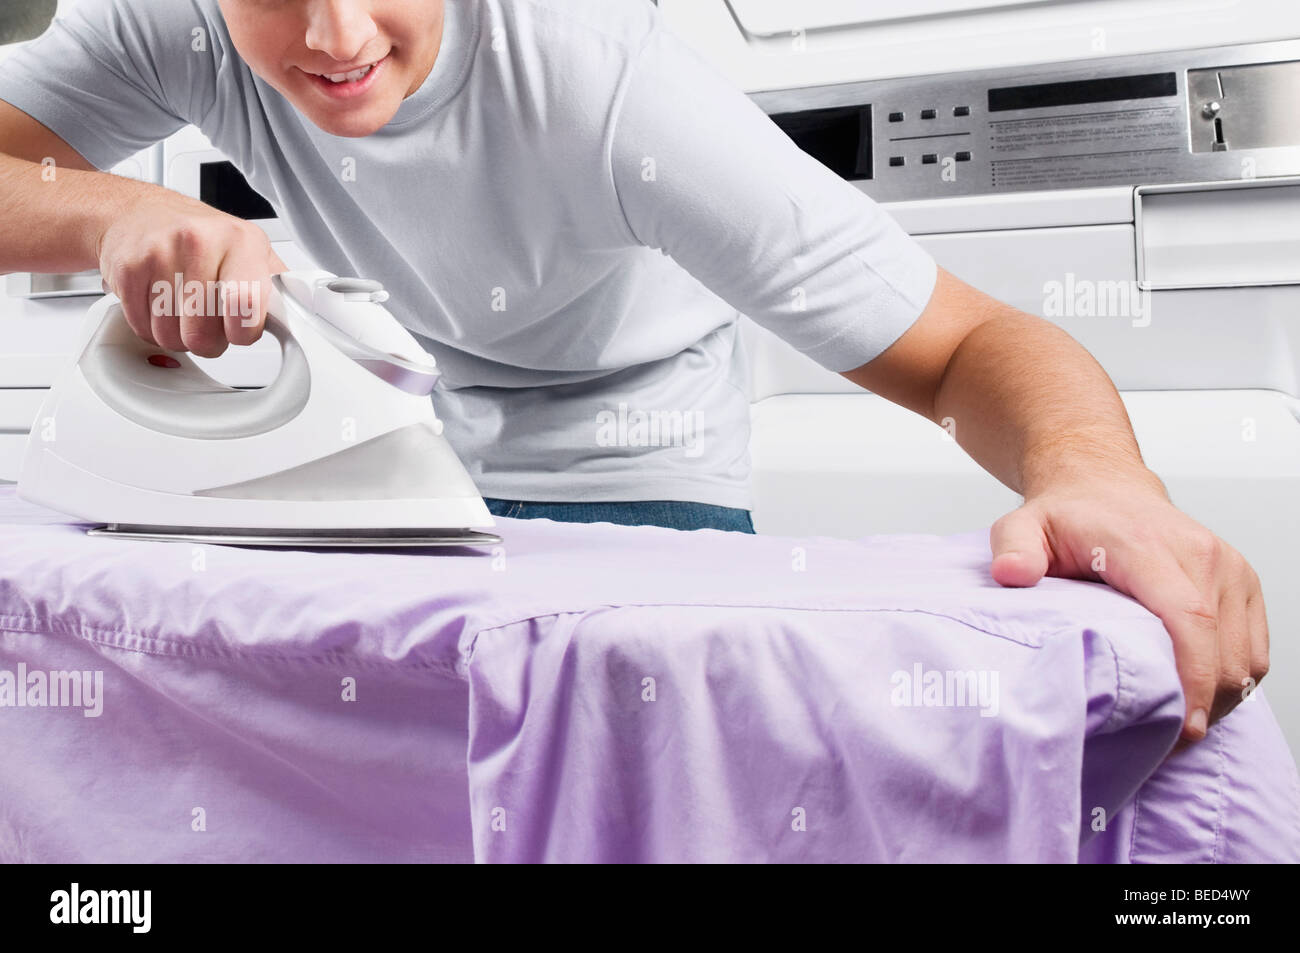 Man ironing in a laundromat Stock Photo